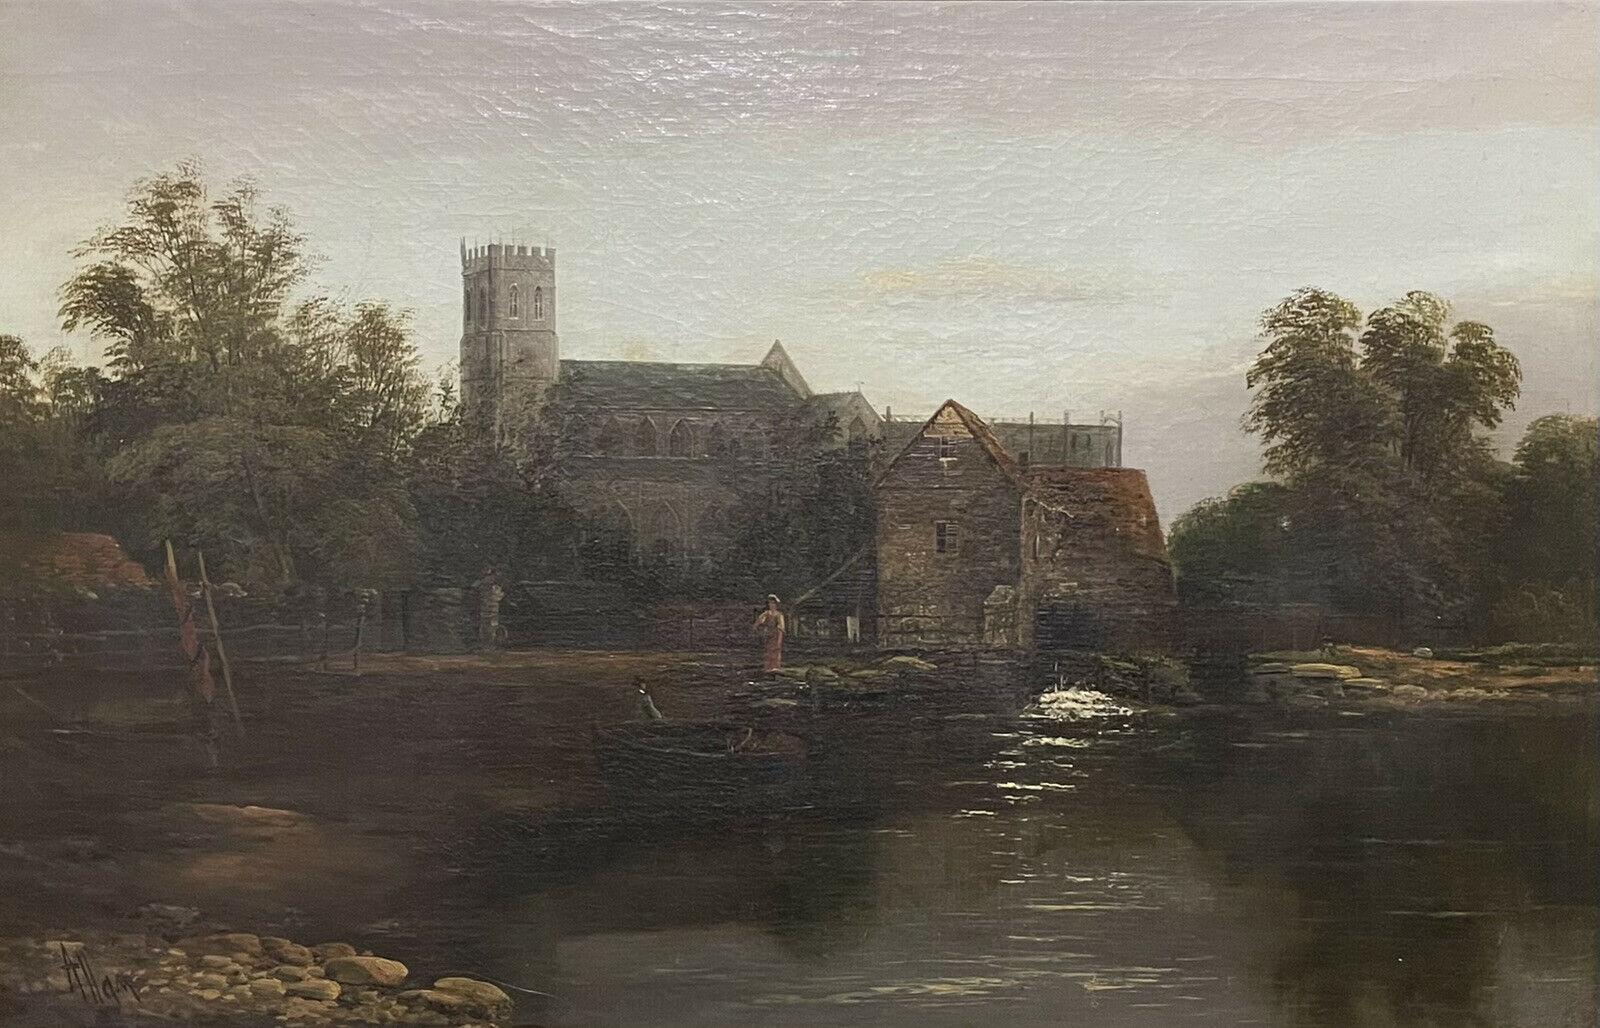 James Allan Landscape Painting - Antique British Signed Oil on Canvas Figures on River by Old Watermill Church